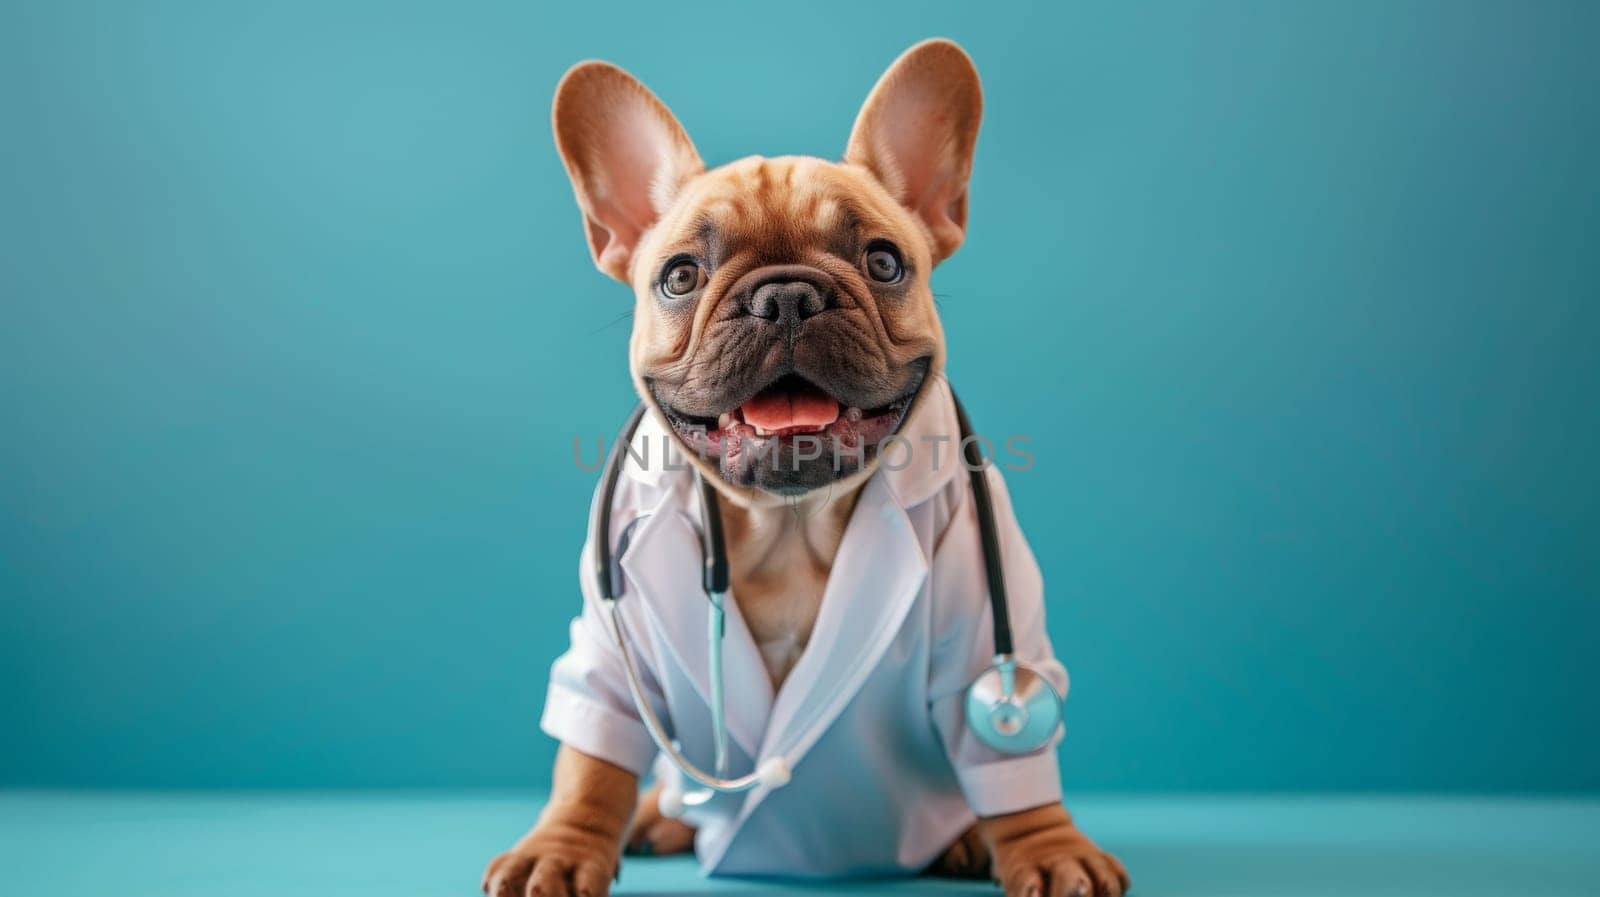 photo of smiling cute dog wearing a lab coat with stethoscope sitting on the blue color background by nijieimu